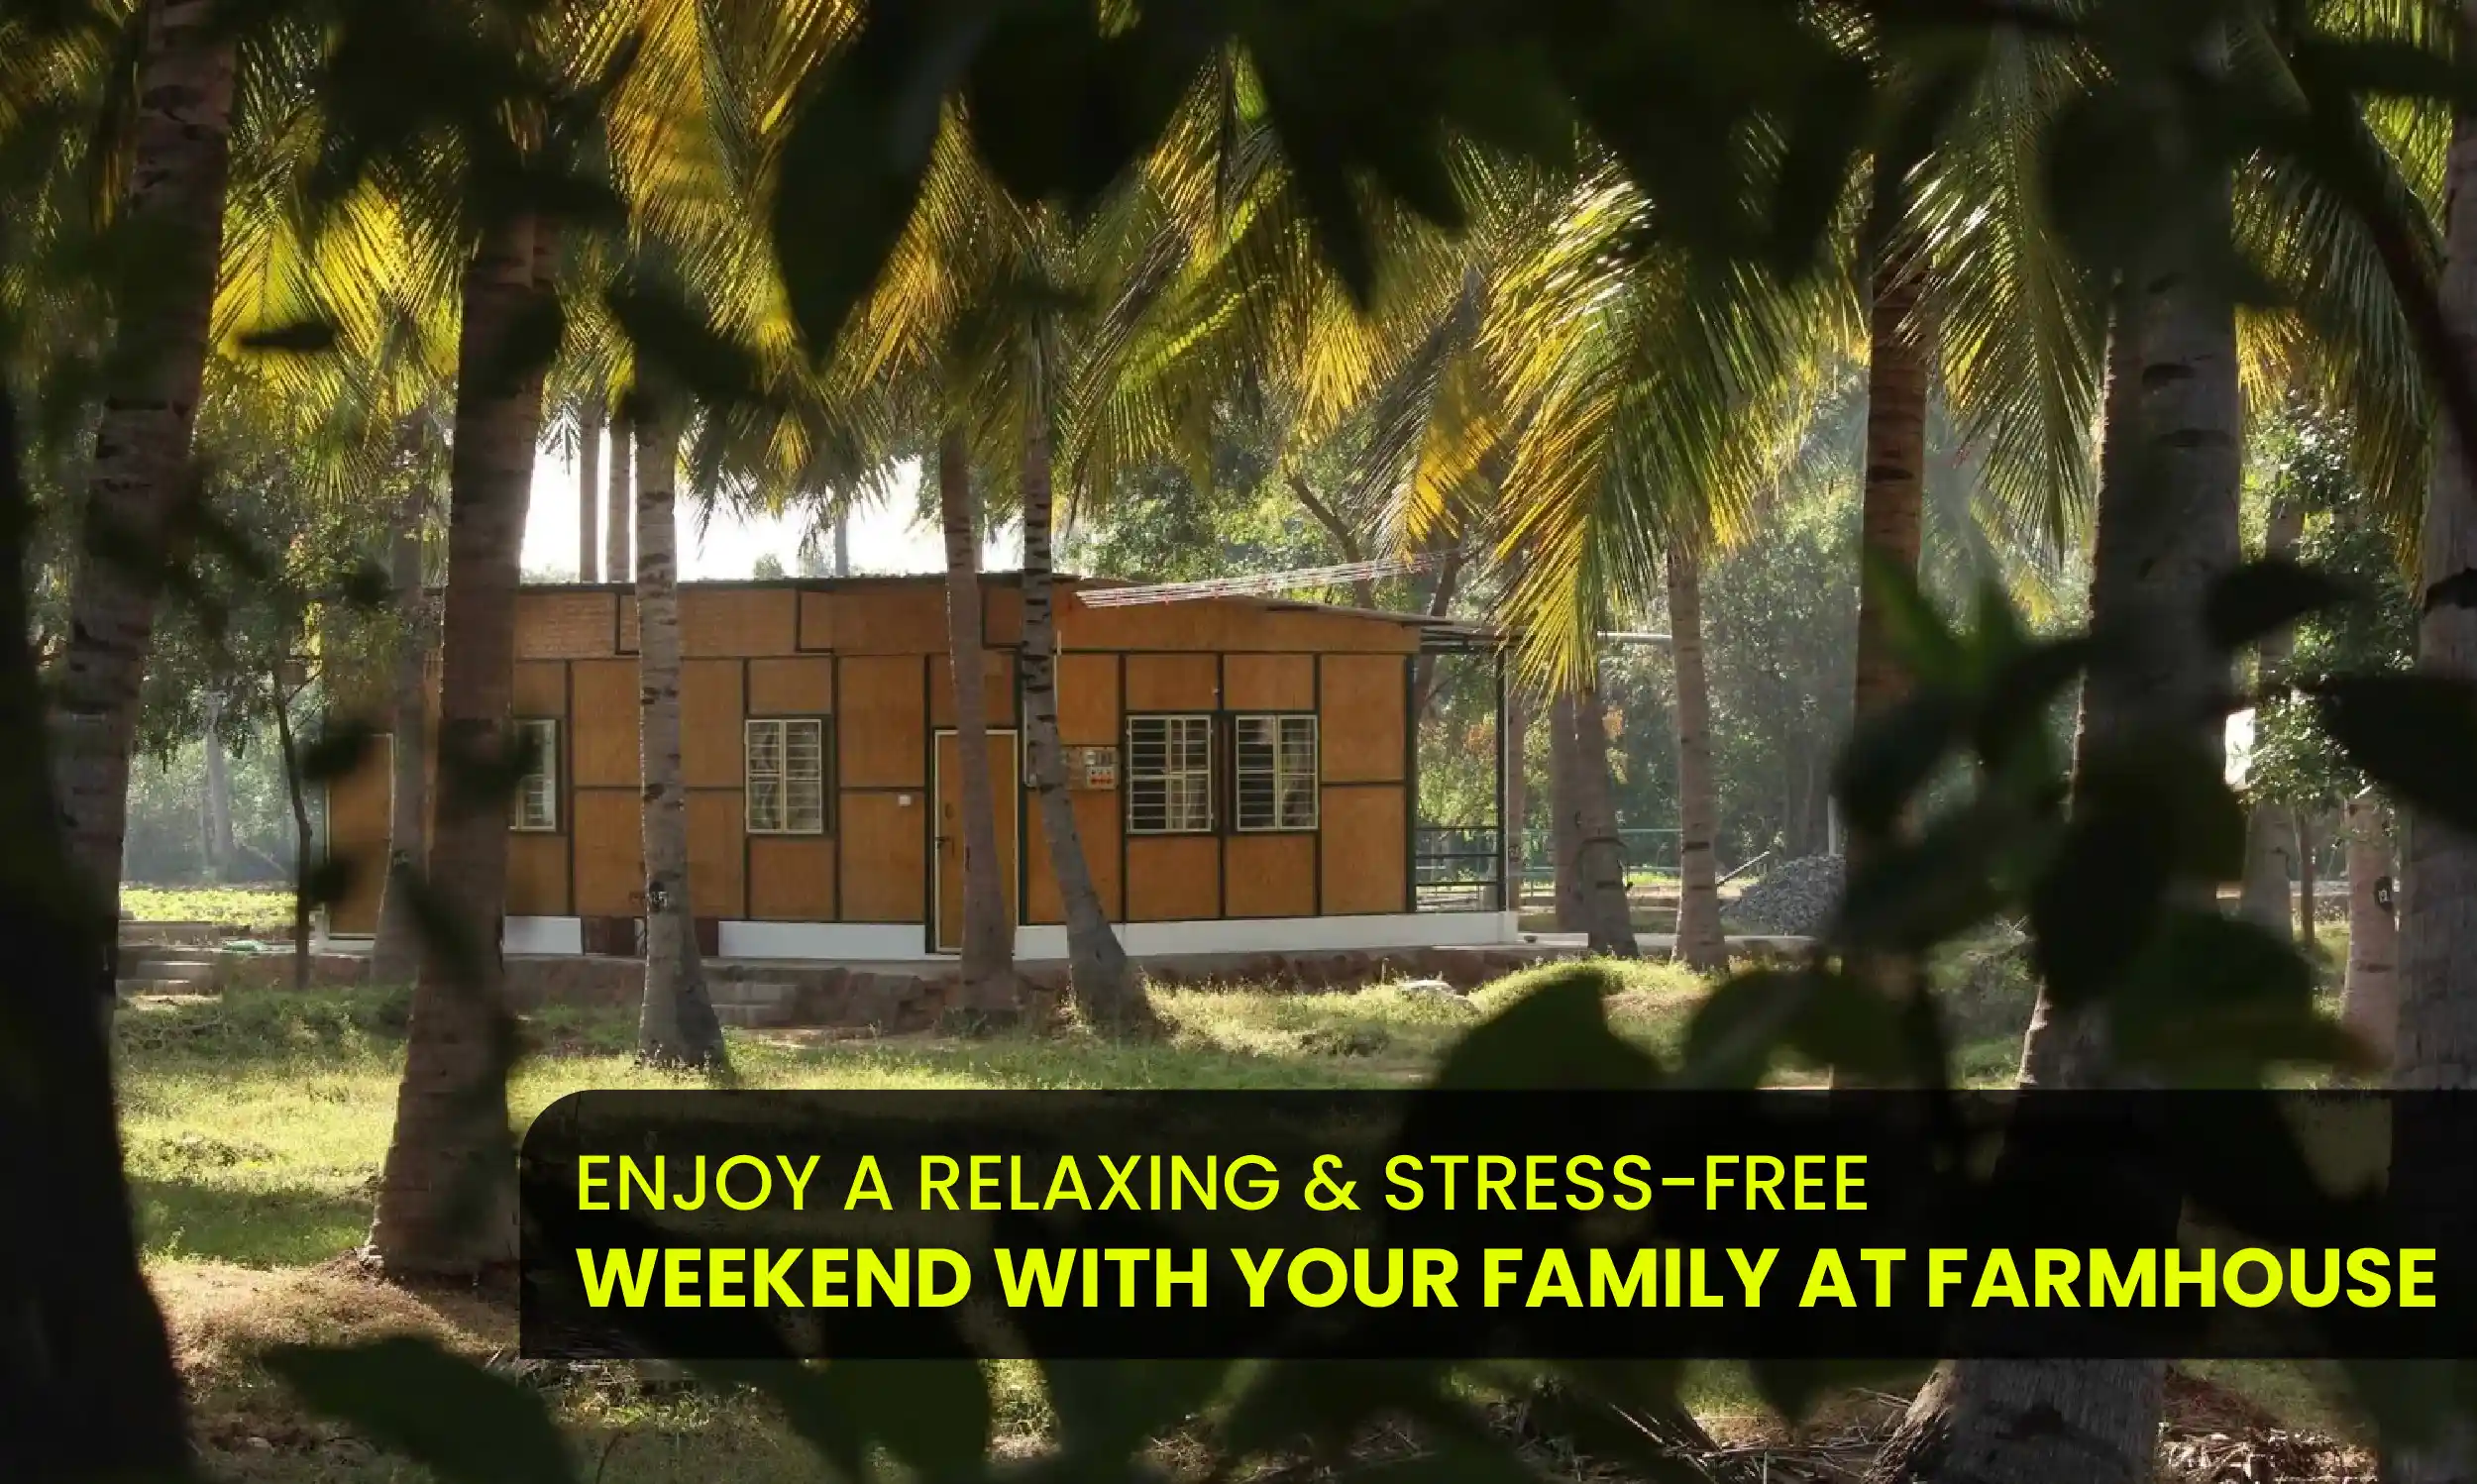 Enjoy a Relaxing, Spend a Stress-Free Weekend with Family at Our Farmhouse